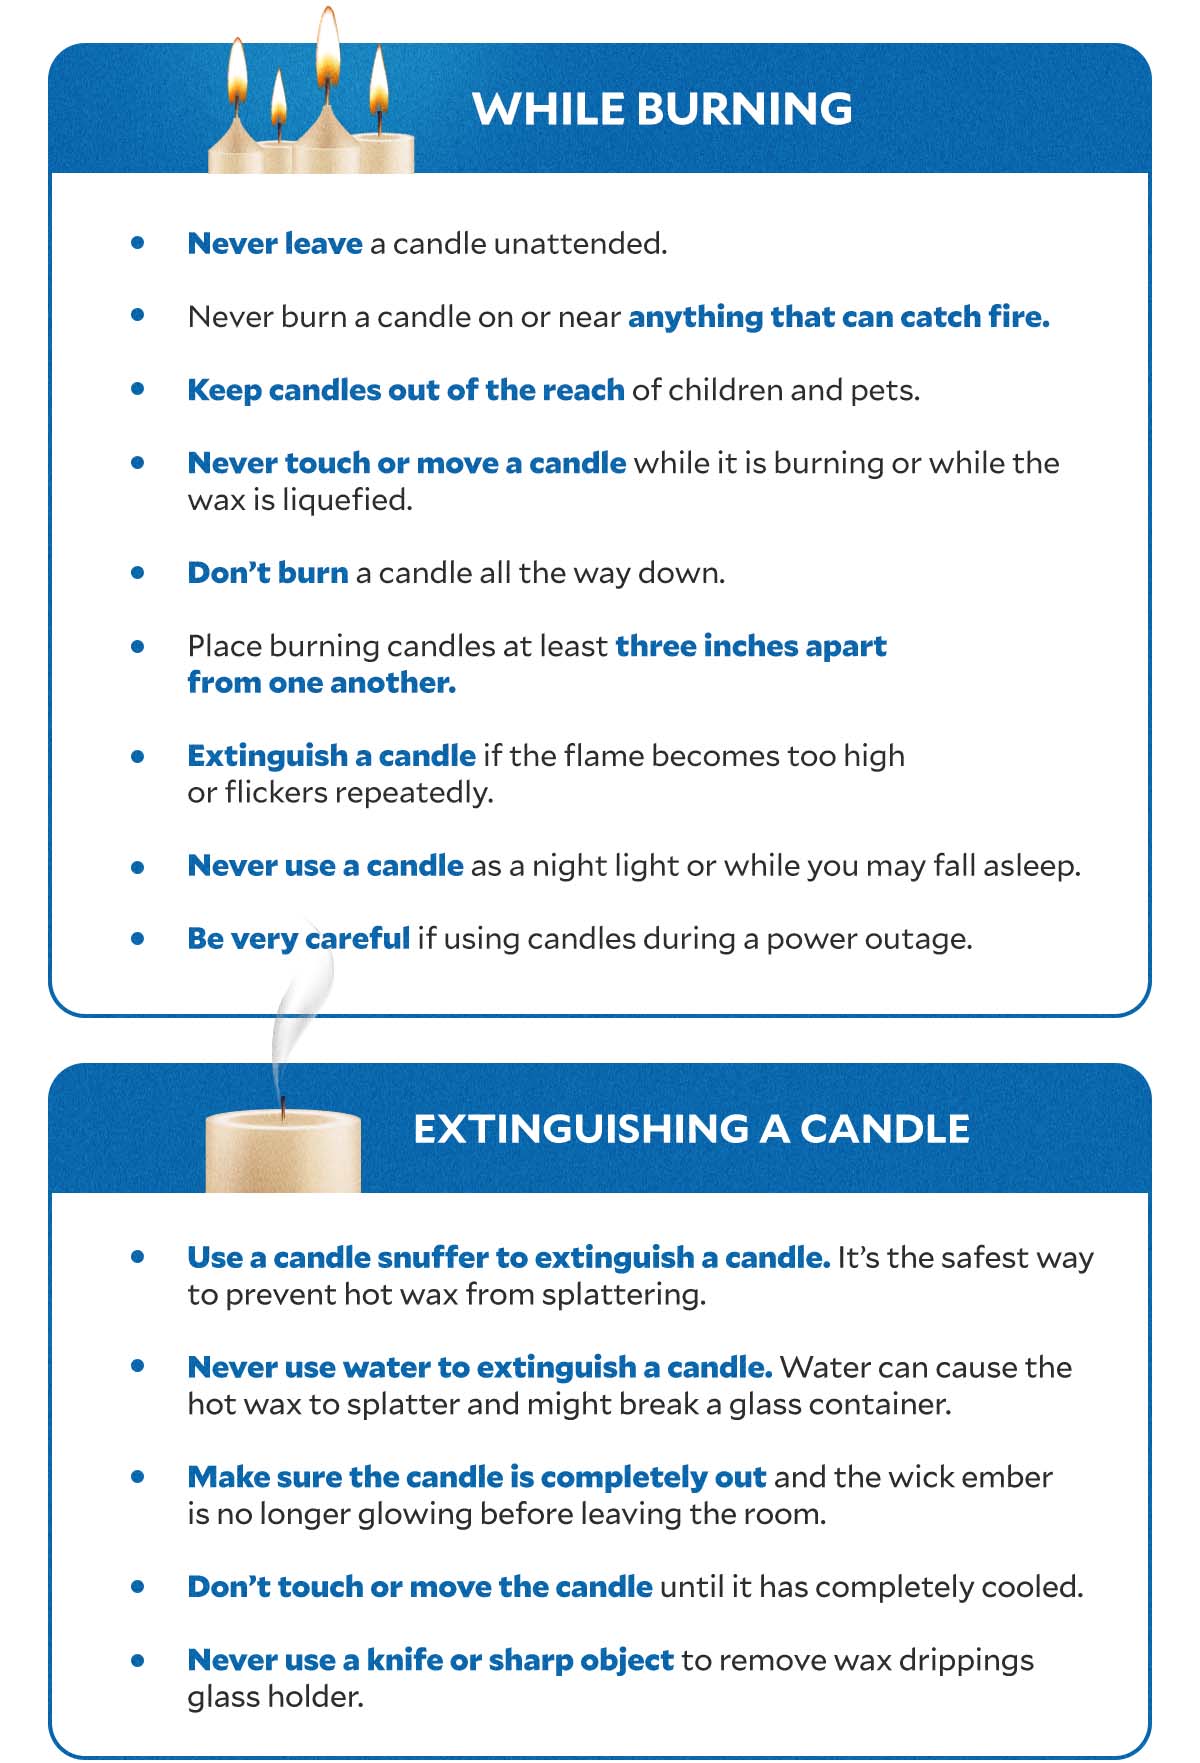 How to burn a candle safely